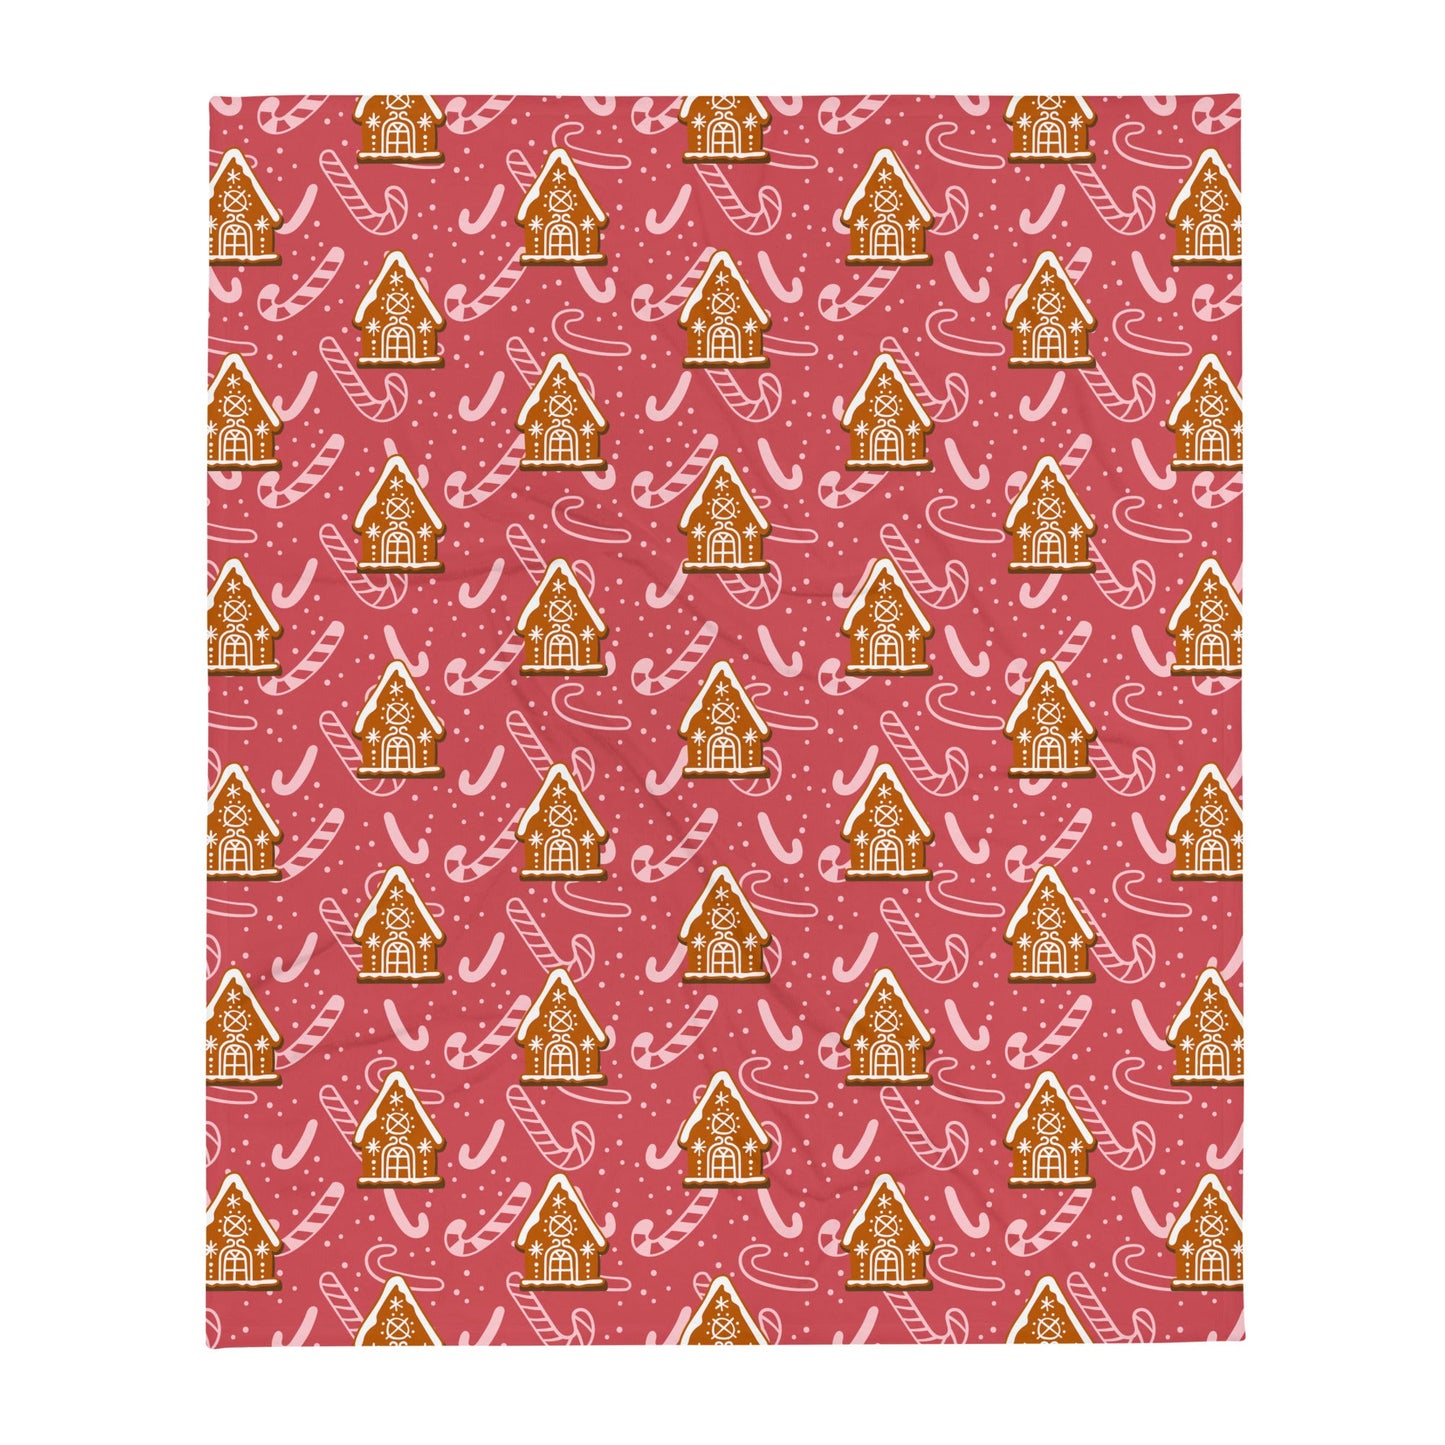 Gingerbread Houses with Candy Canes - Christmas - Throw Blanket